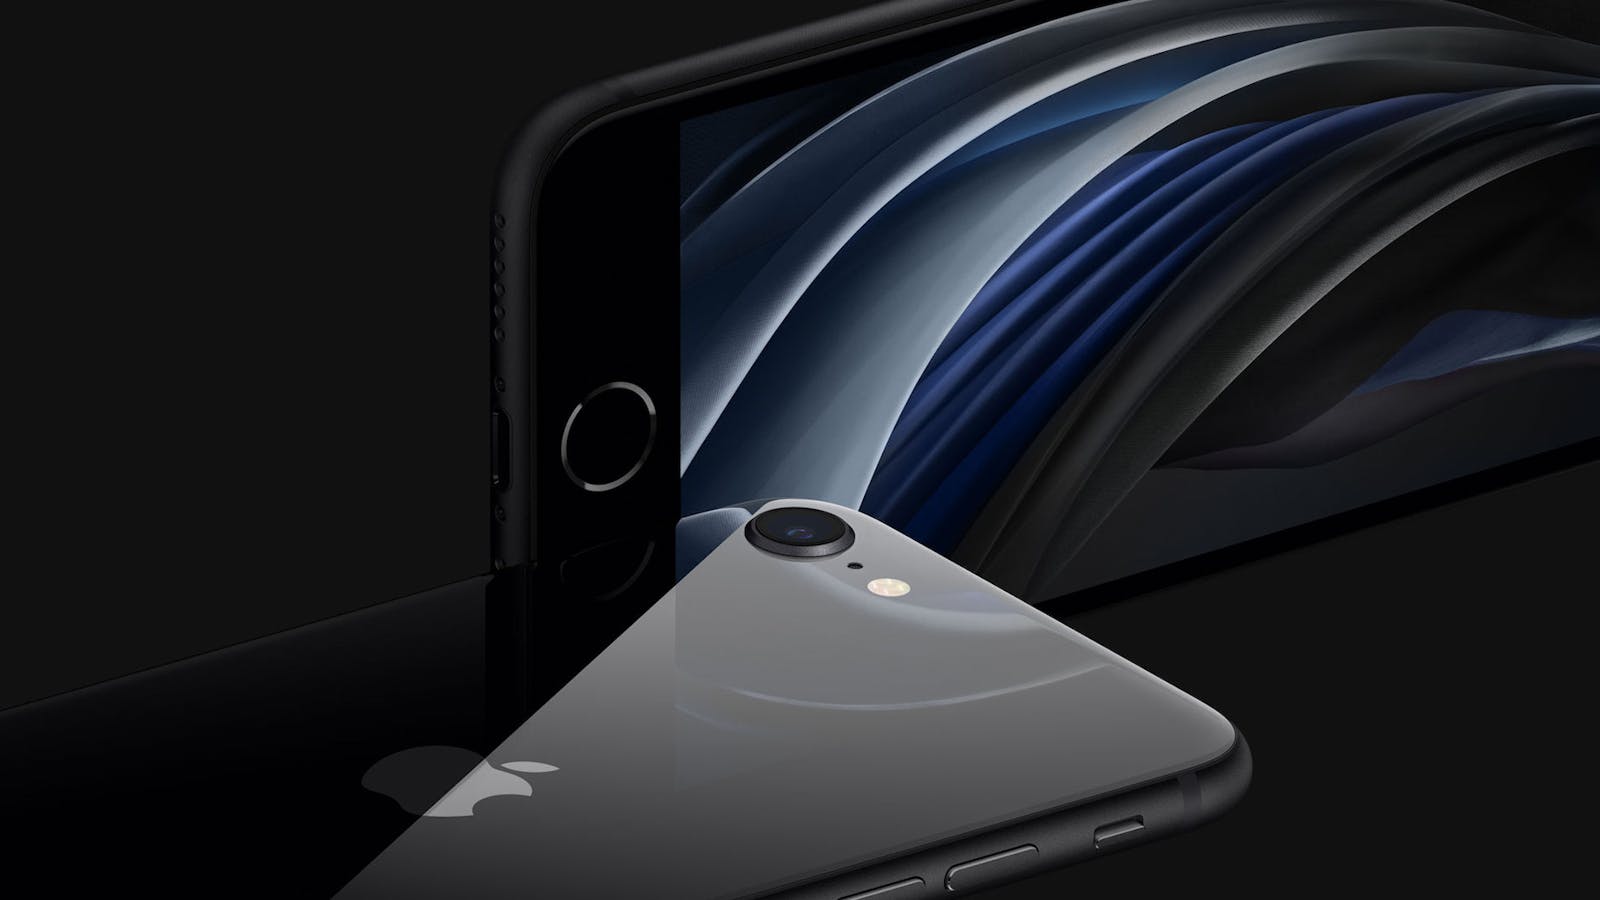 As AR improves, the SE's single rear camera and limited sensors could hold iPhones back. Credit: Apple